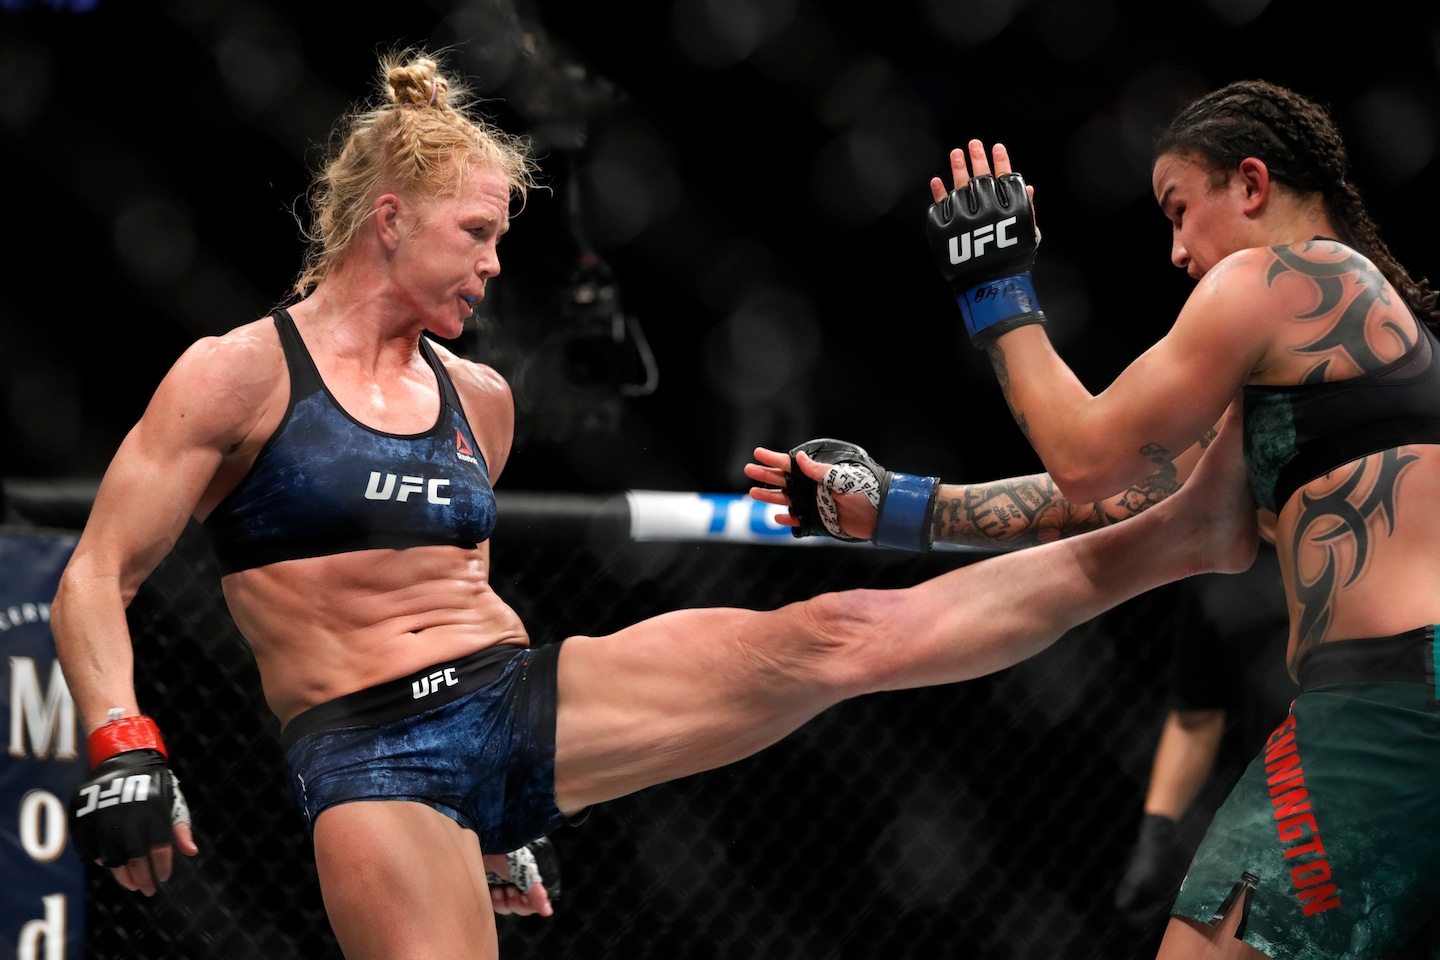 At UFC 300, 42-year-old Holly Holm eyes an avenue back to title contention